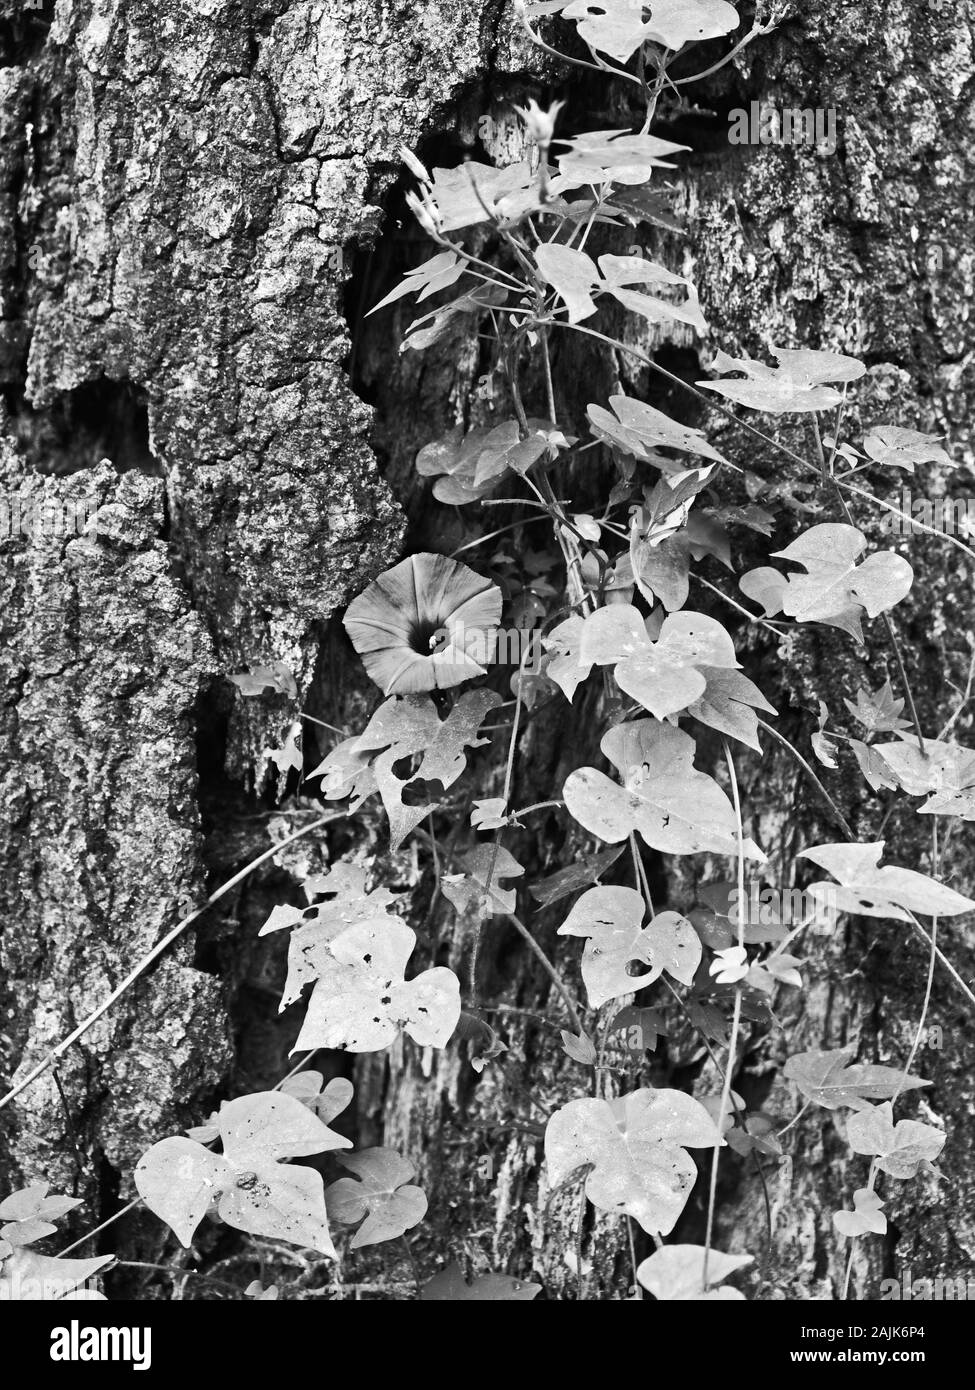 Spring TX USA - 10/10/2019 - Wild Flower Growing on Tree in B&W Banque D'Images